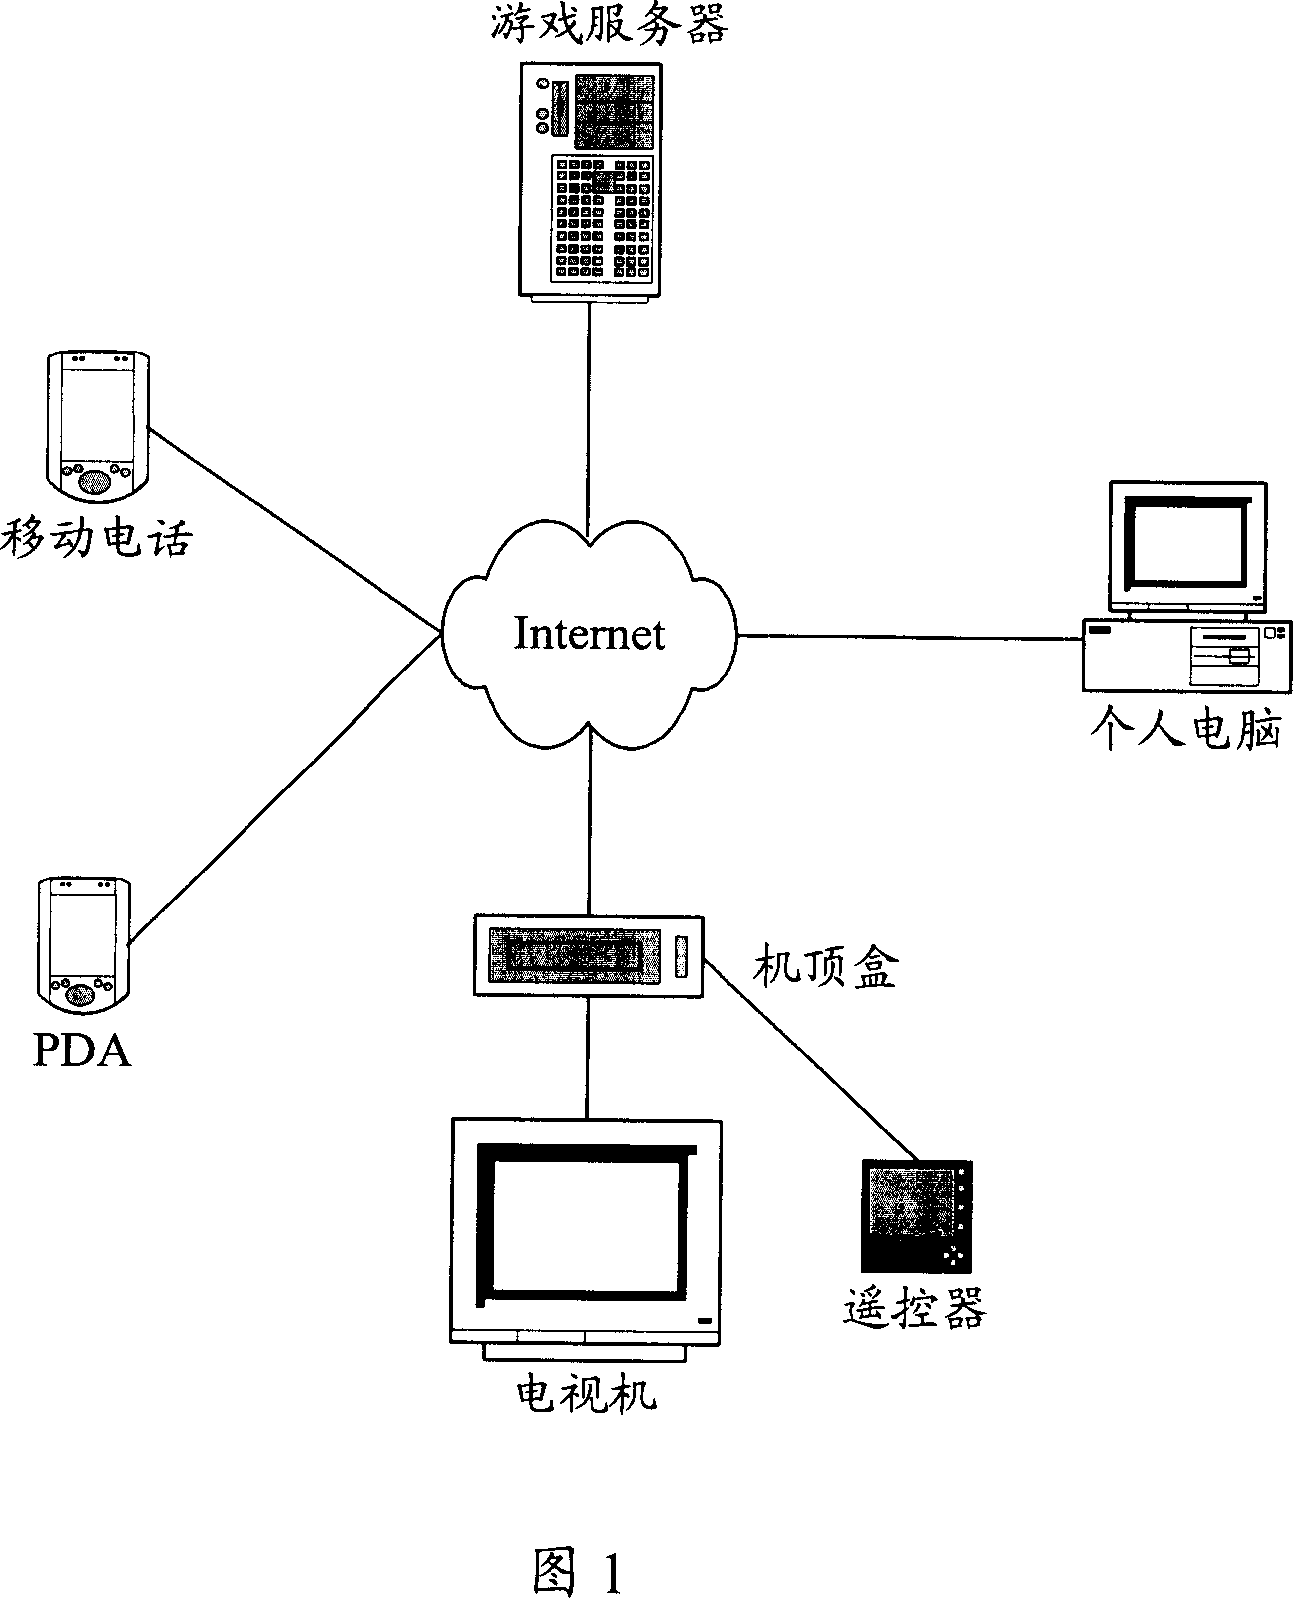 Operation control method and system for card game terminal